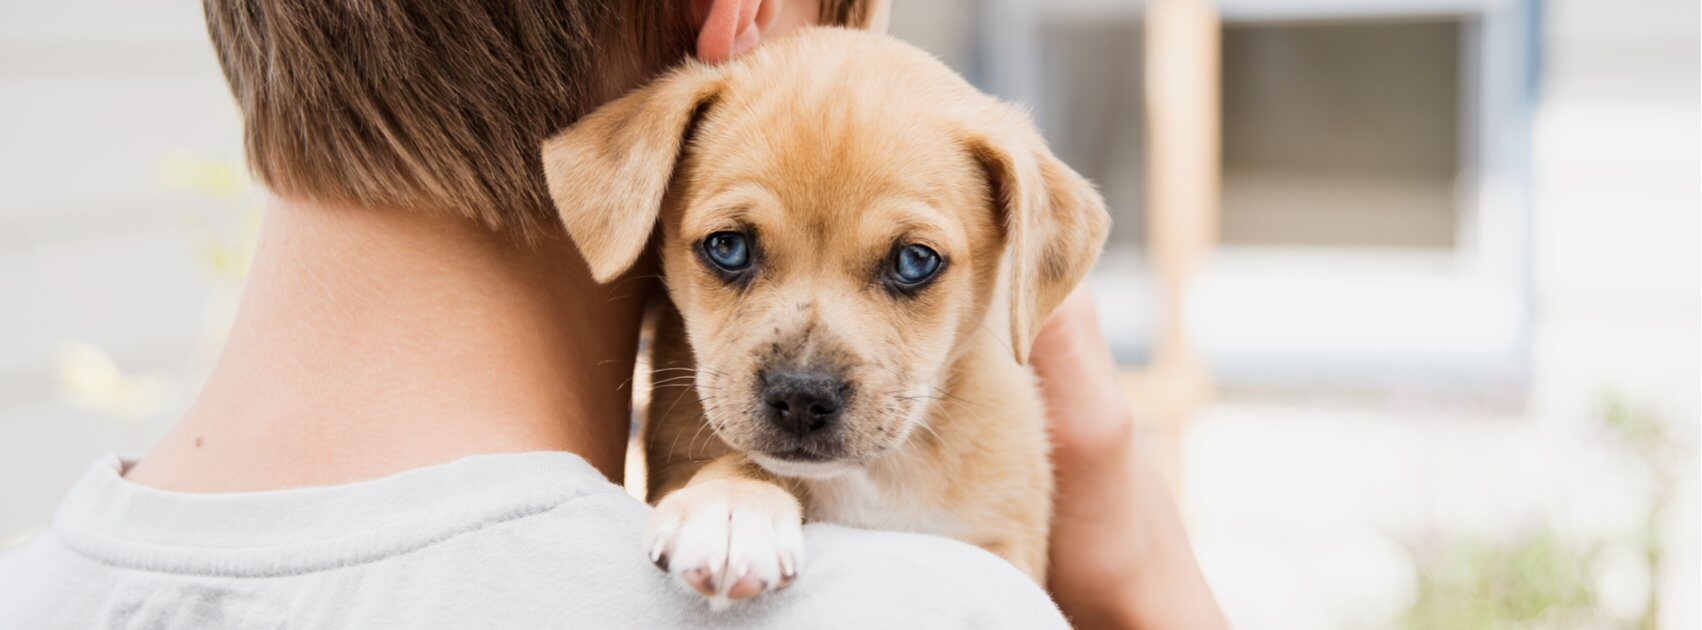 Steps to Take When Choosing and Caring for a New Pet